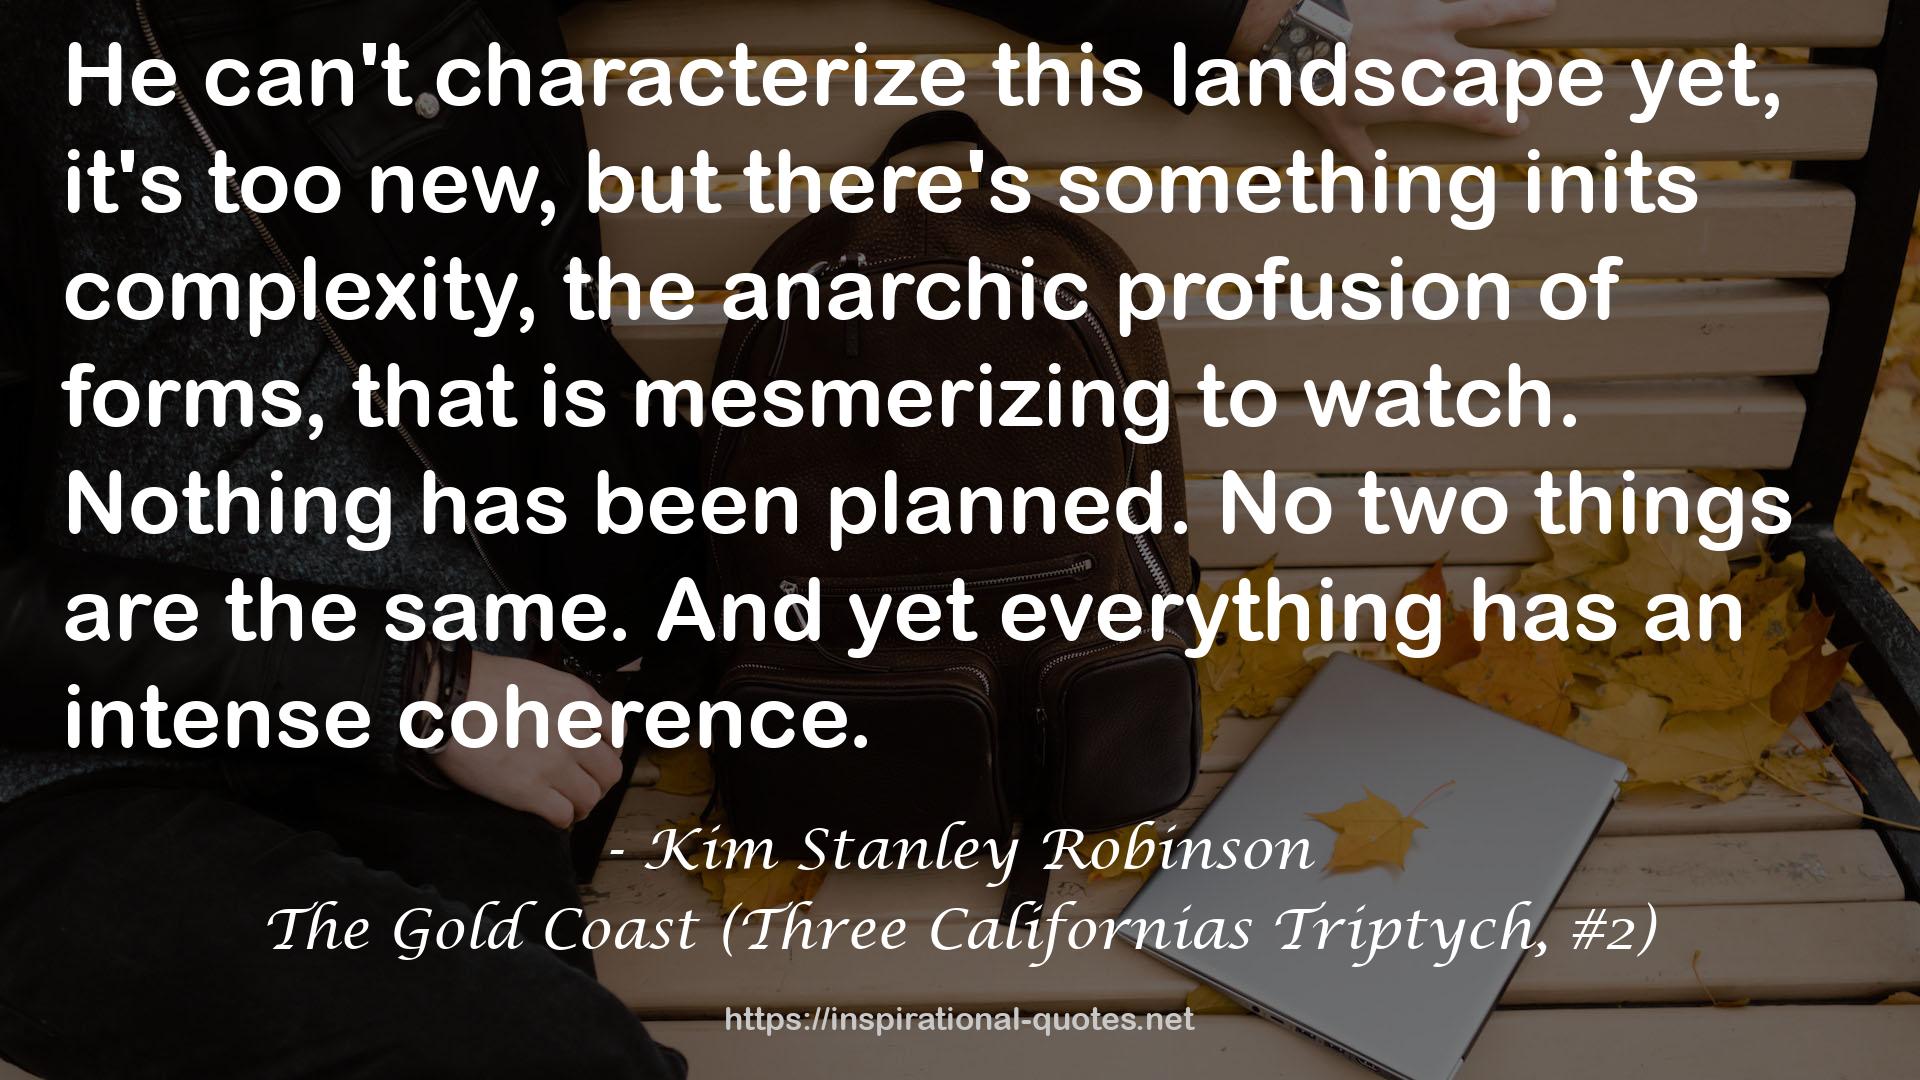 The Gold Coast (Three Californias Triptych, #2) QUOTES